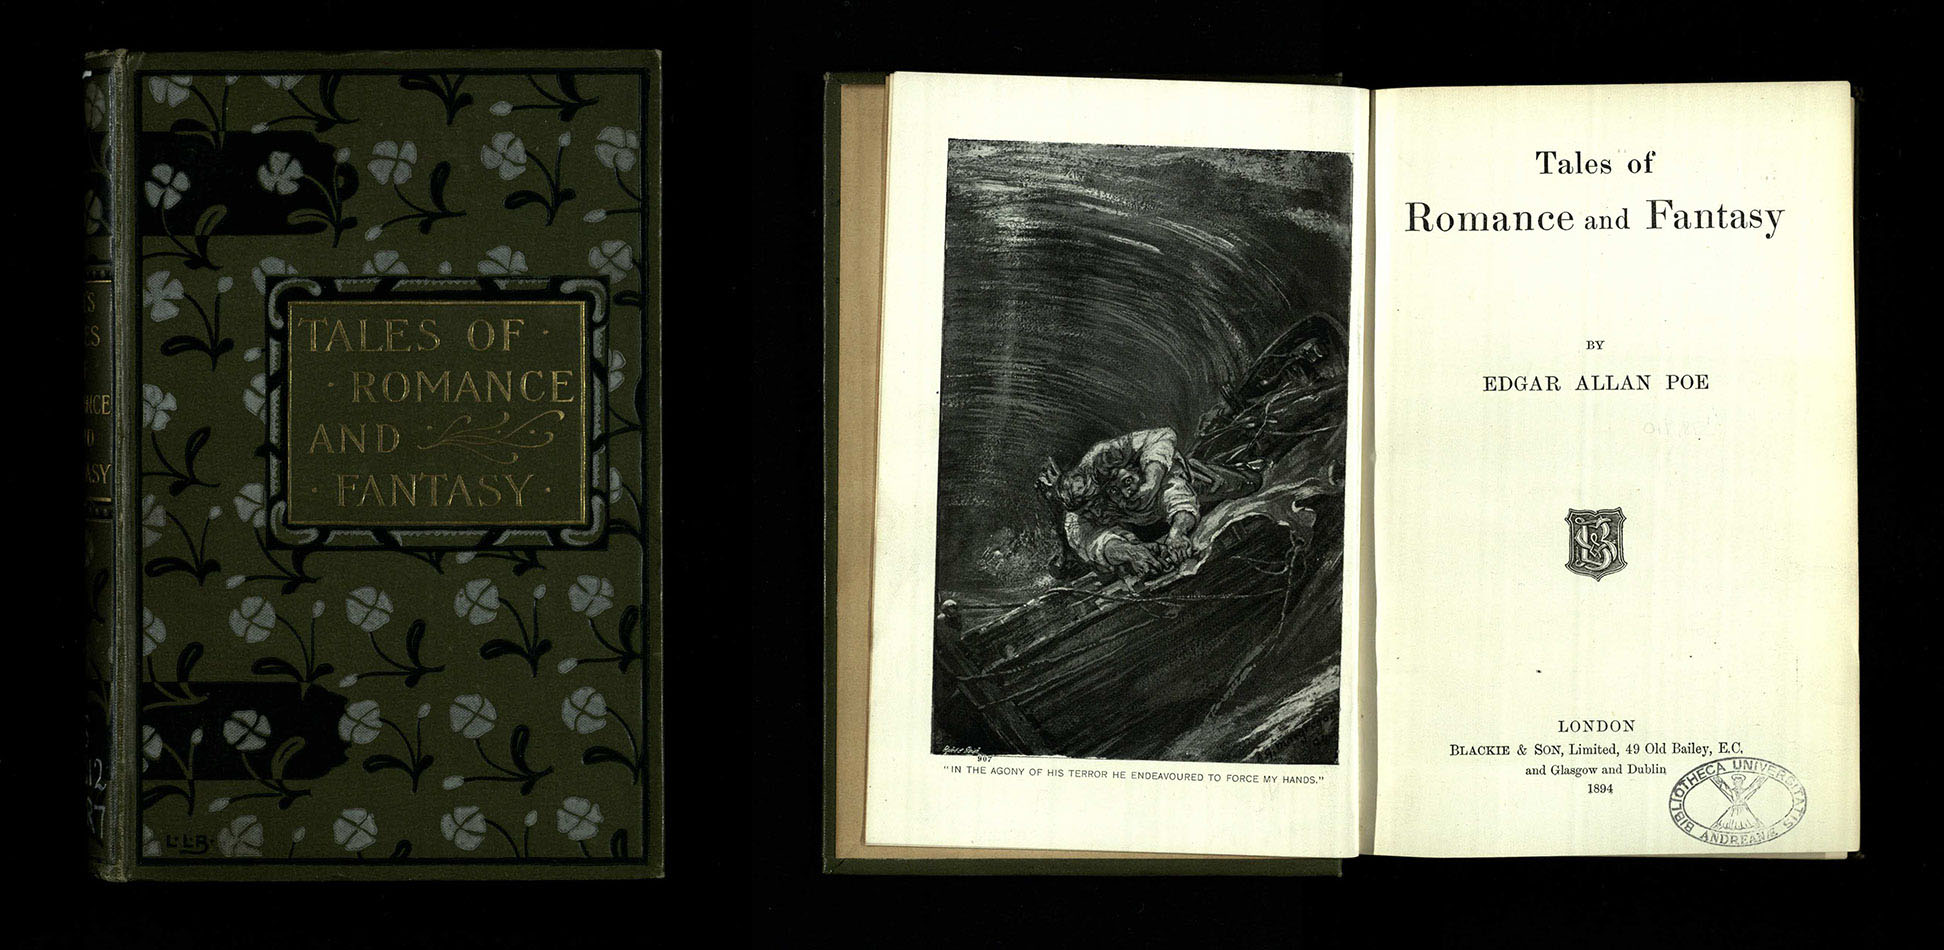 Tales of Romance and Fantasy, an 1894 imprint of Edgar Allan Poe tales (sPS 2612.T2R7).